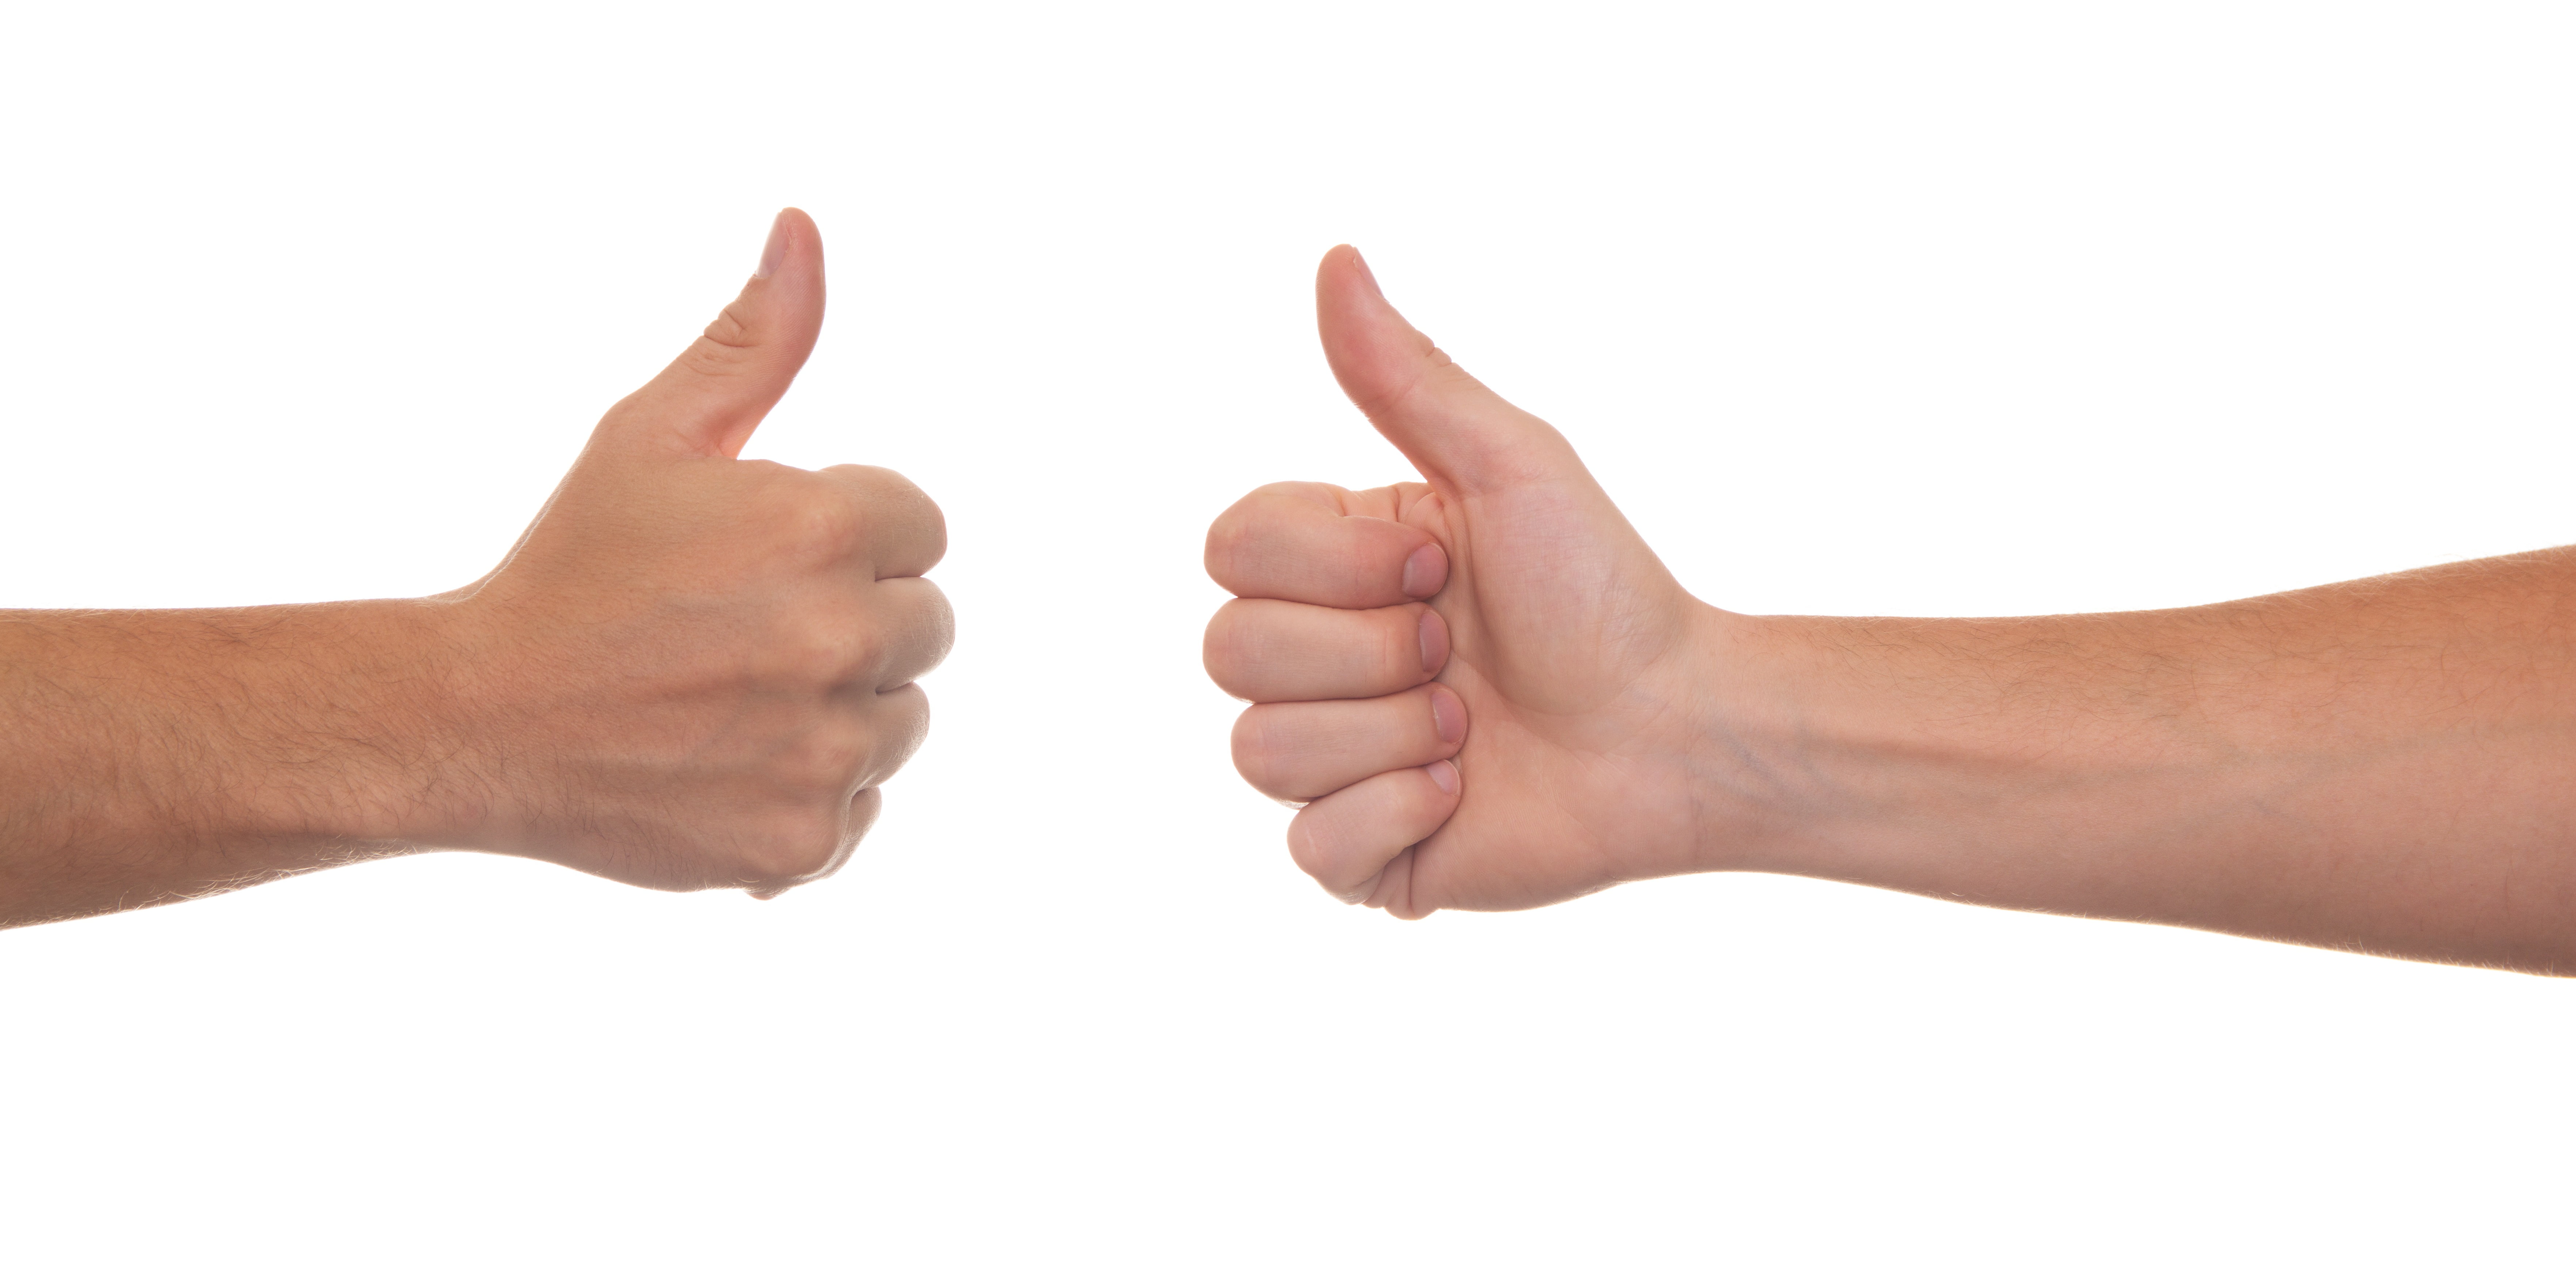 two person's hand doing thumbs up gestures